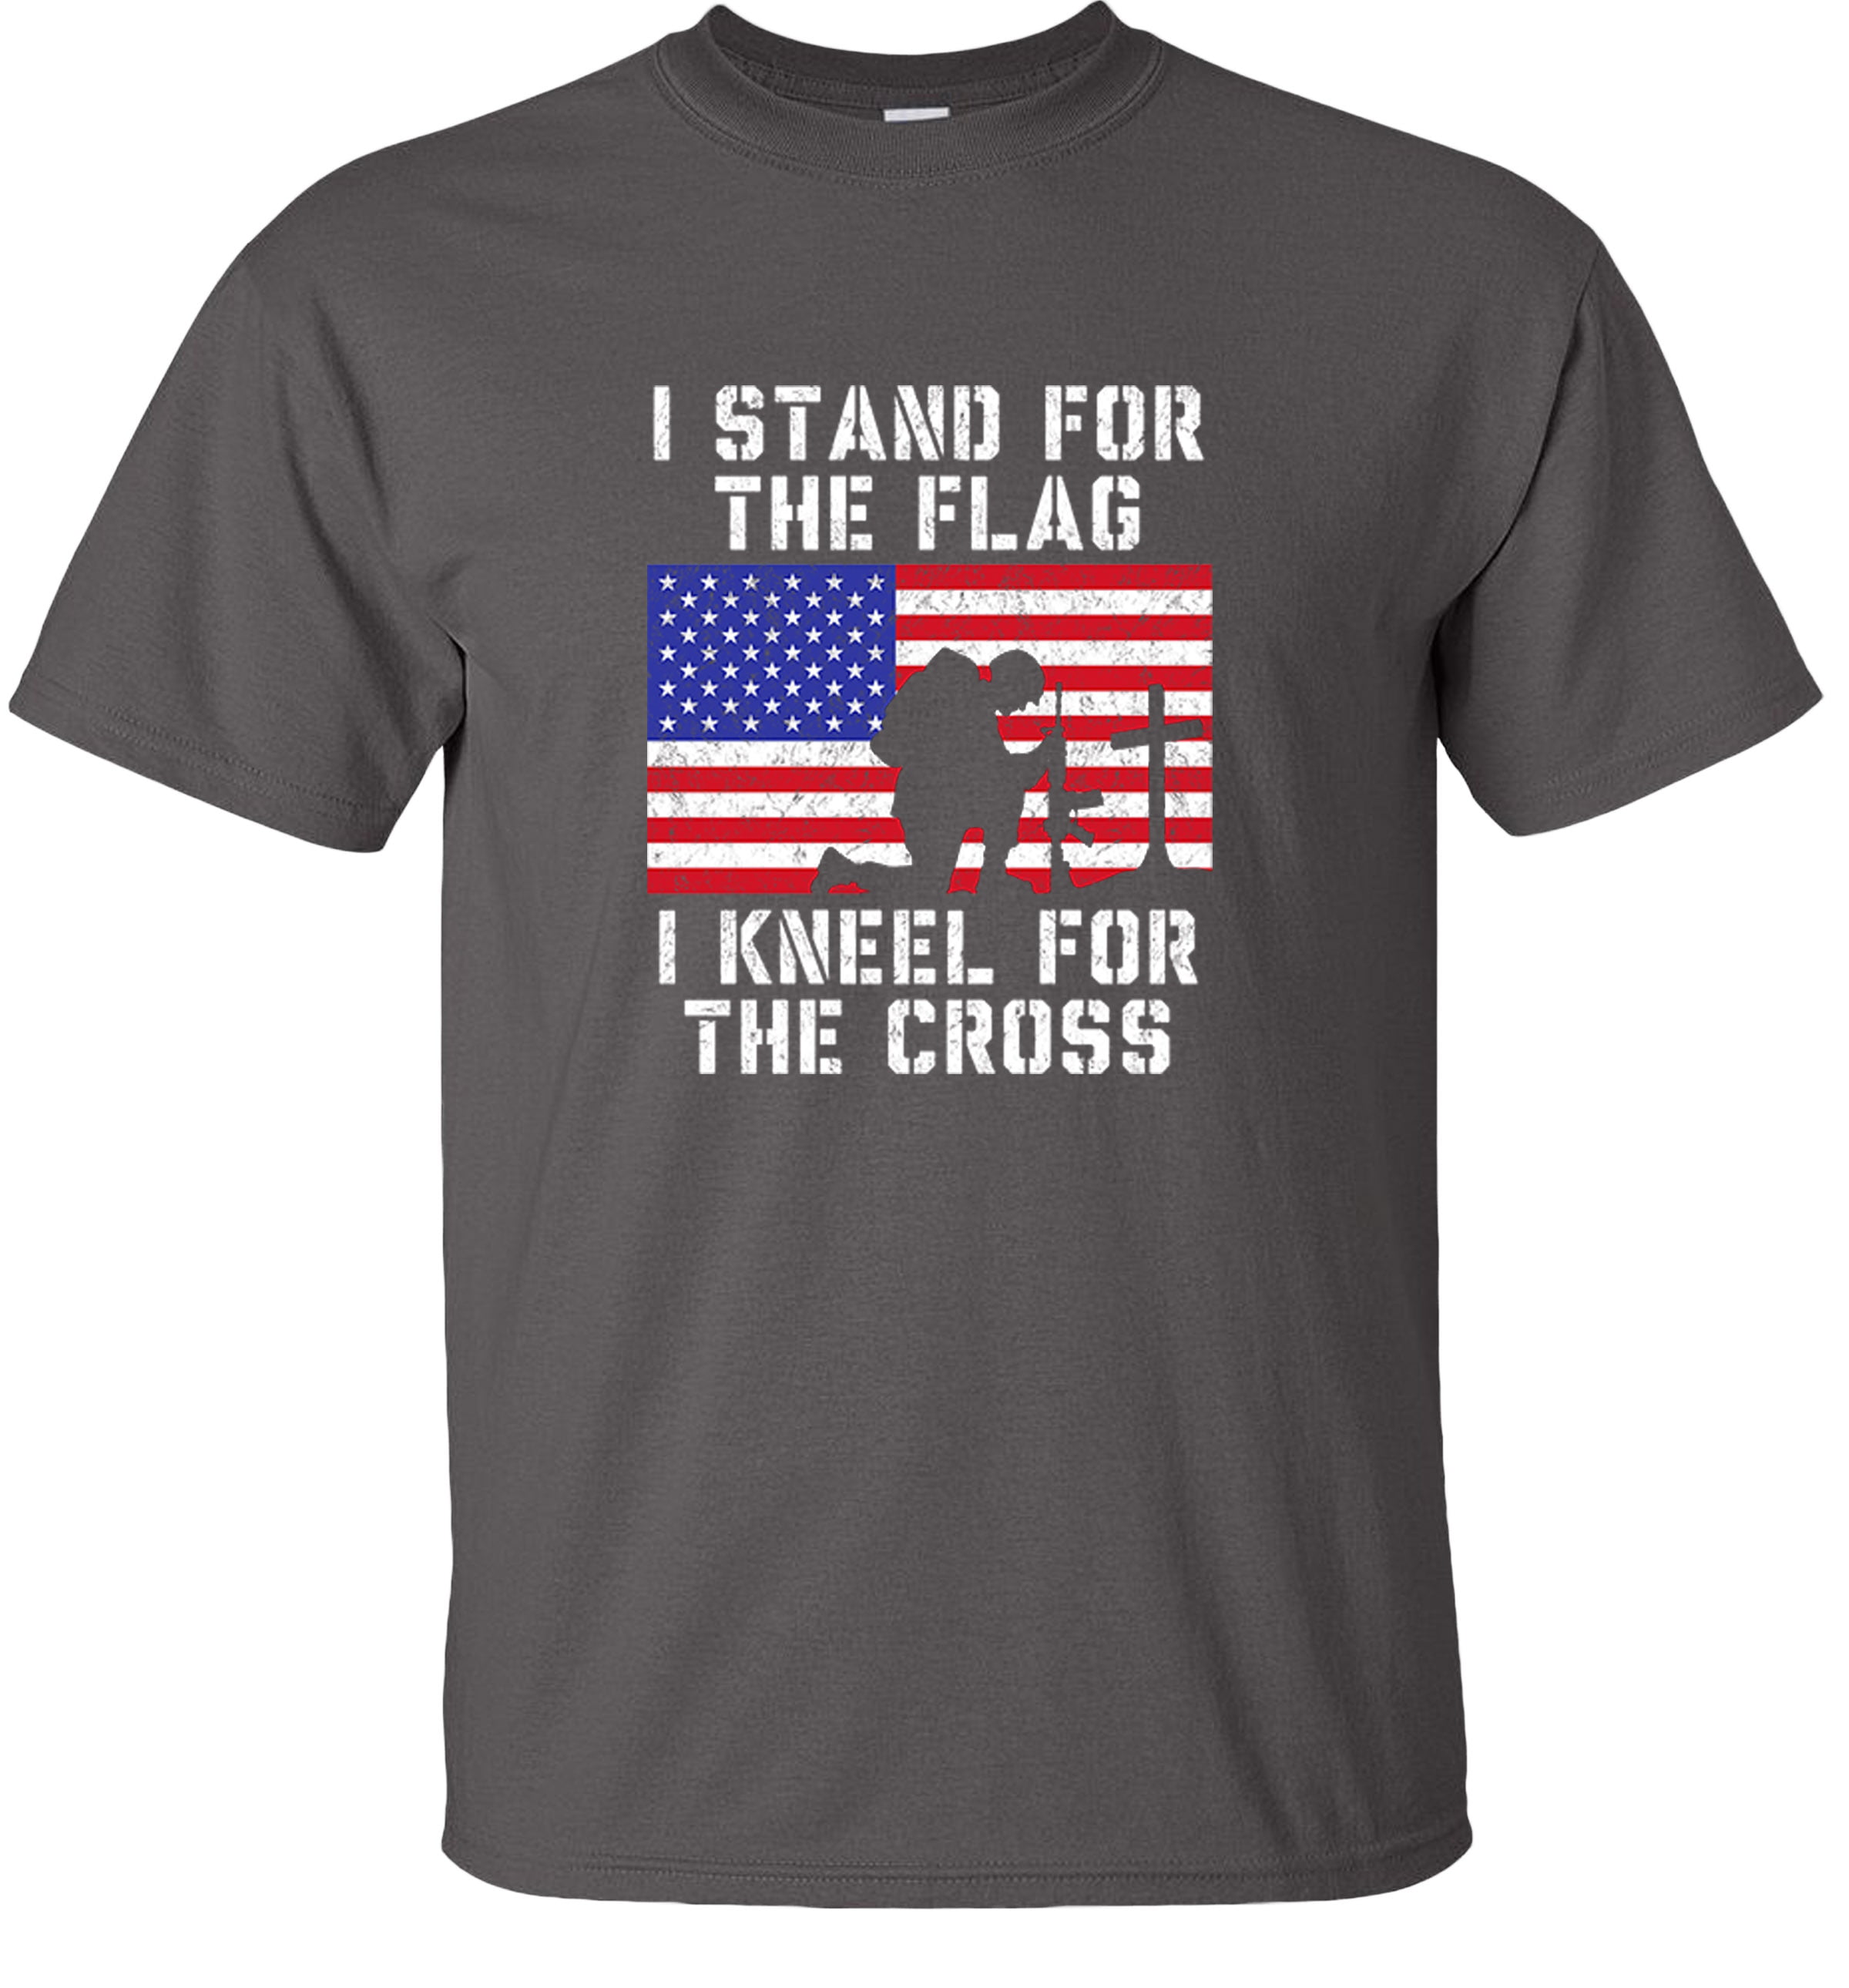 I WILL ALWAYS STAND FOR THE FLAG & KNEEL FOR THE CROSS PATRIOTIC TEE